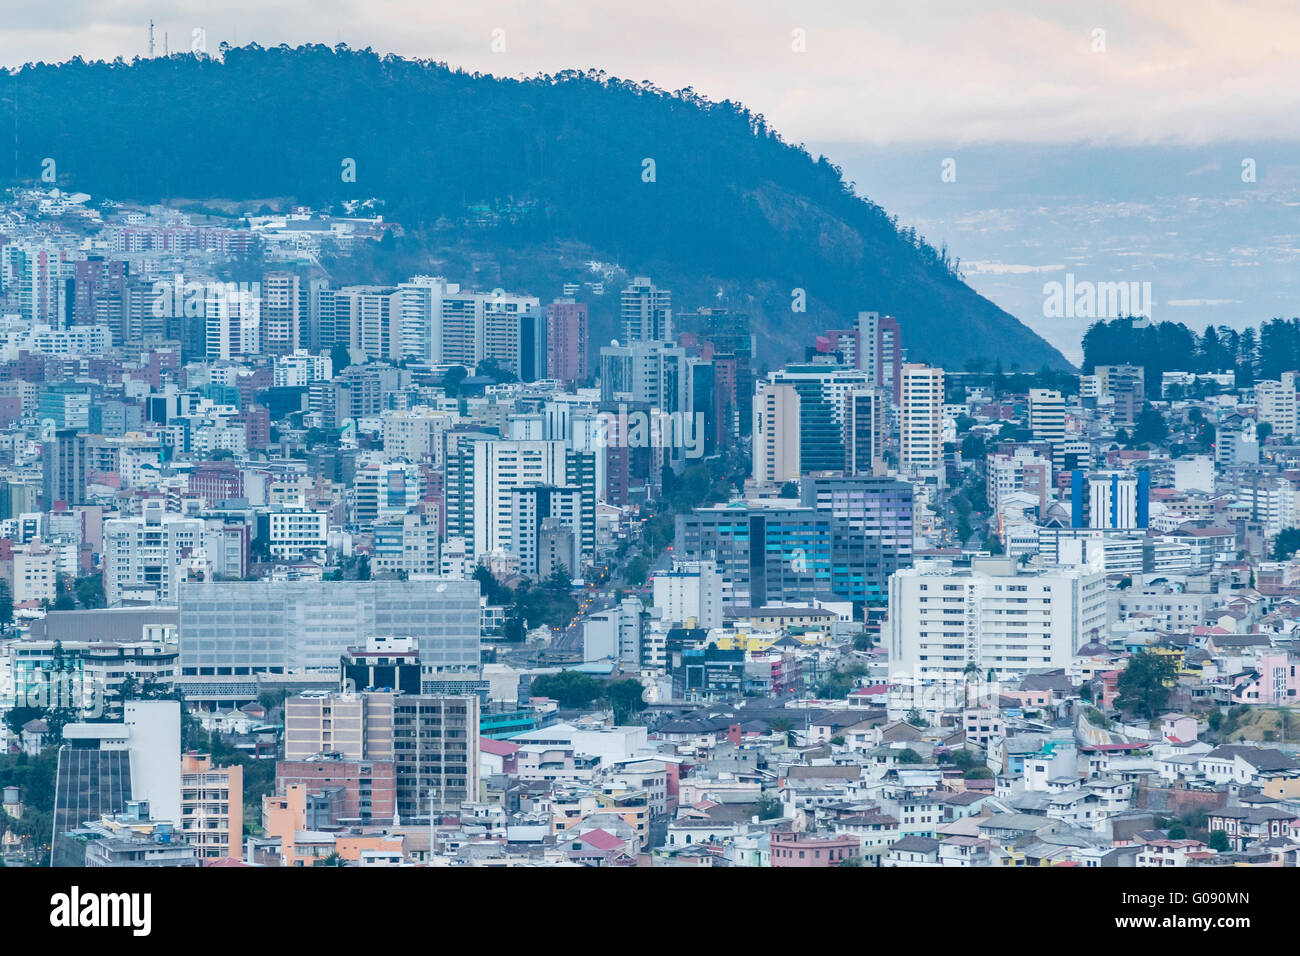 Cityscape panoramic aerial view from panecillo viewpoint of Quito city, Ecuador. Stock Photo